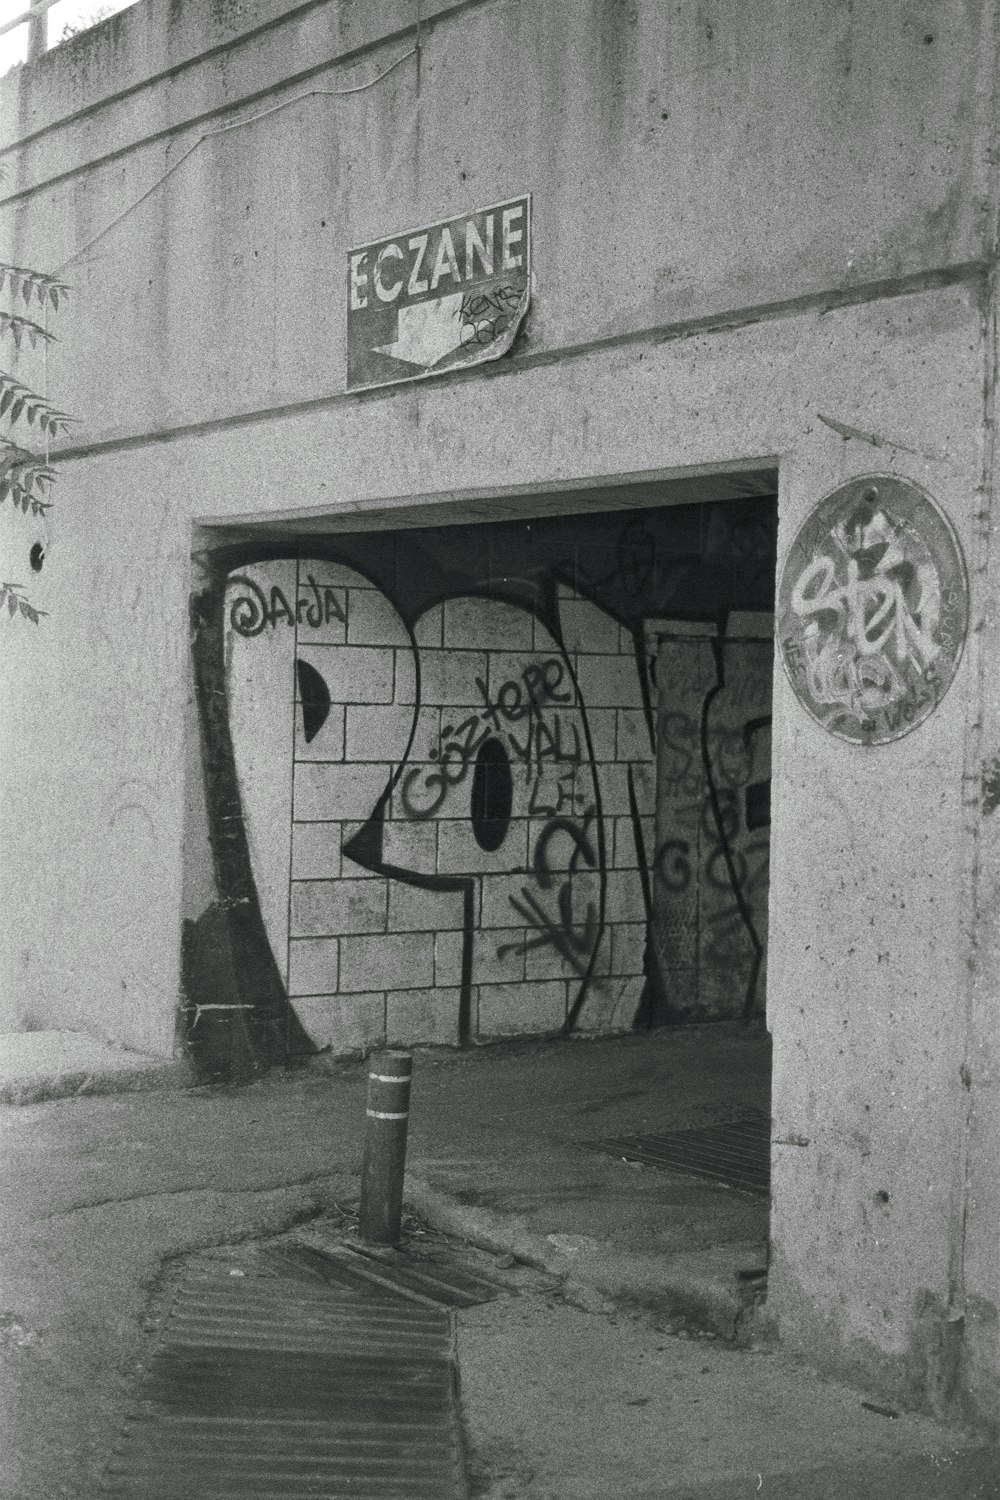 a black and white photo of graffiti on a building